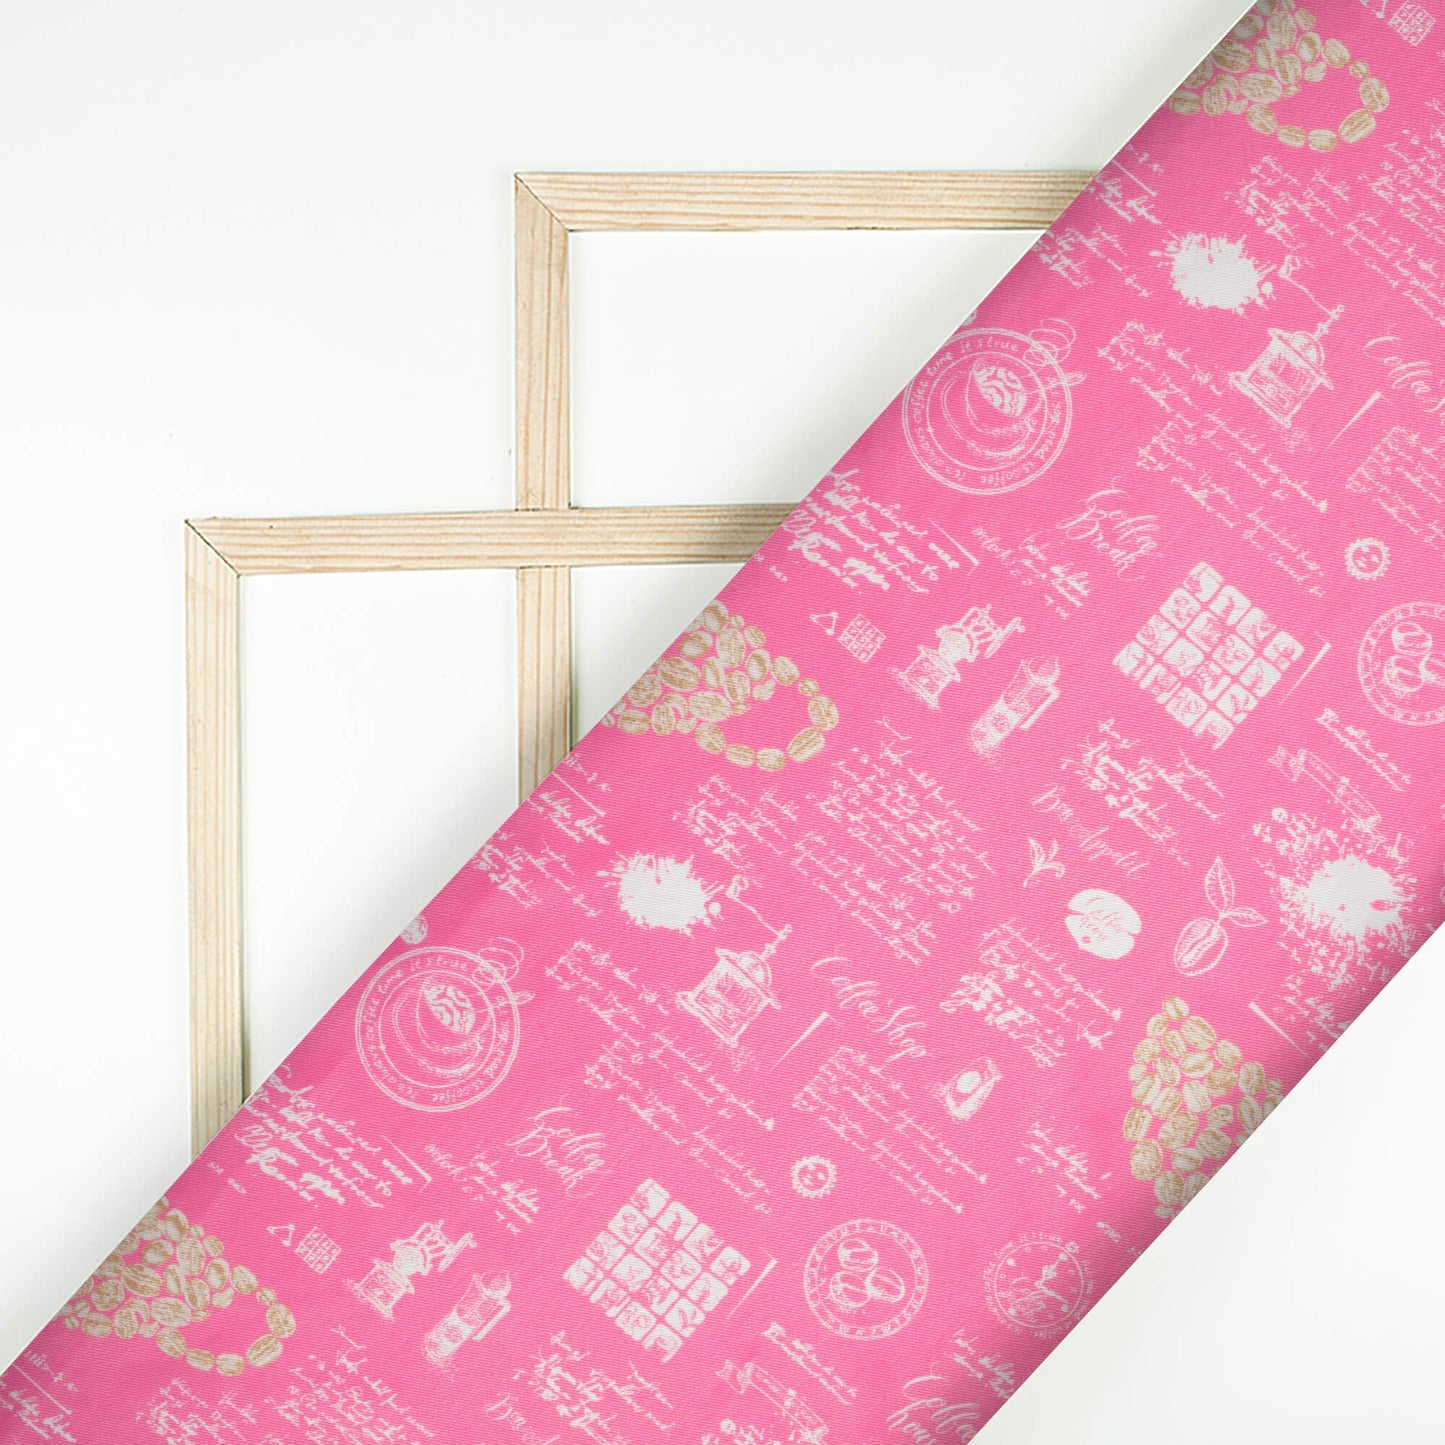 Taffy Pink And White Quiky Pattern Digital Print Twill Fabric (Width 56 Inches)